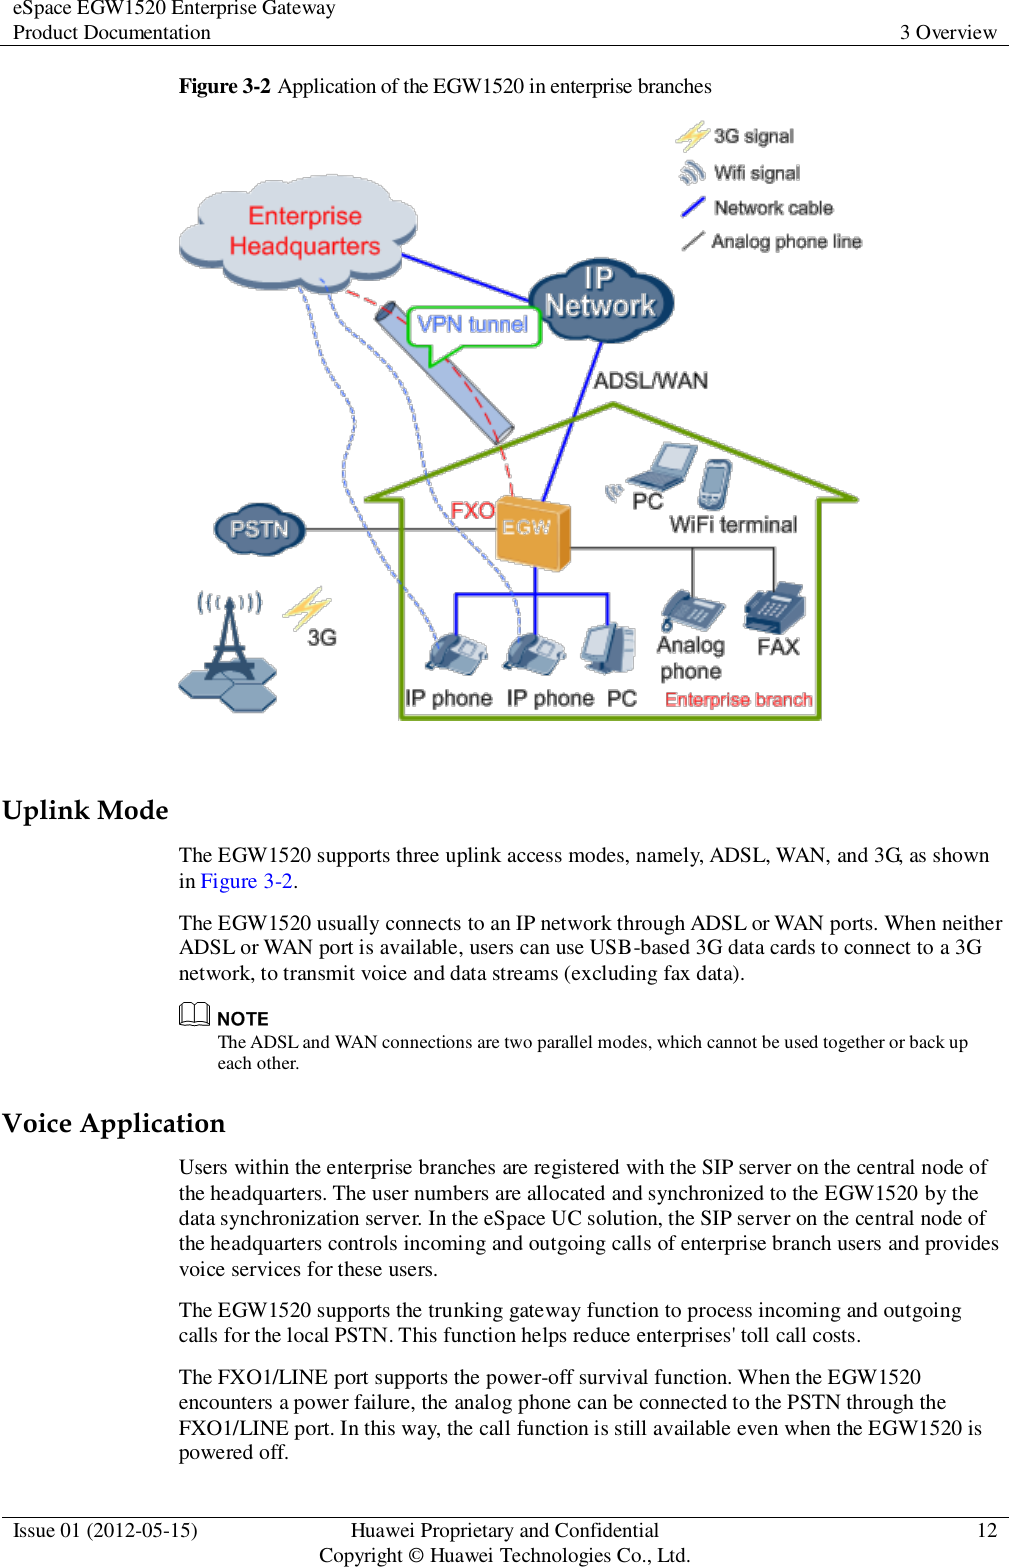 eSpace EGW1520 Enterprise Gateway Product Documentation 3 Overview  Issue 01 (2012-05-15) Huawei Proprietary and Confidential                                     Copyright © Huawei Technologies Co., Ltd. 12  Figure 3-2 Application of the EGW1520 in enterprise branches   Uplink Mode The EGW1520 supports three uplink access modes, namely, ADSL, WAN, and 3G, as shown in Figure 3-2. The EGW1520 usually connects to an IP network through ADSL or WAN ports. When neither ADSL or WAN port is available, users can use USB-based 3G data cards to connect to a 3G network, to transmit voice and data streams (excluding fax data).  The ADSL and WAN connections are two parallel modes, which cannot be used together or back up each other. Voice Application Users within the enterprise branches are registered with the SIP server on the central node of the headquarters. The user numbers are allocated and synchronized to the EGW1520 by the data synchronization server. In the eSpace UC solution, the SIP server on the central node of the headquarters controls incoming and outgoing calls of enterprise branch users and provides voice services for these users. The EGW1520 supports the trunking gateway function to process incoming and outgoing calls for the local PSTN. This function helps reduce enterprises&apos; toll call costs.   The FXO1/LINE port supports the power-off survival function. When the EGW1520 encounters a power failure, the analog phone can be connected to the PSTN through the FXO1/LINE port. In this way, the call function is still available even when the EGW1520 is powered off. 